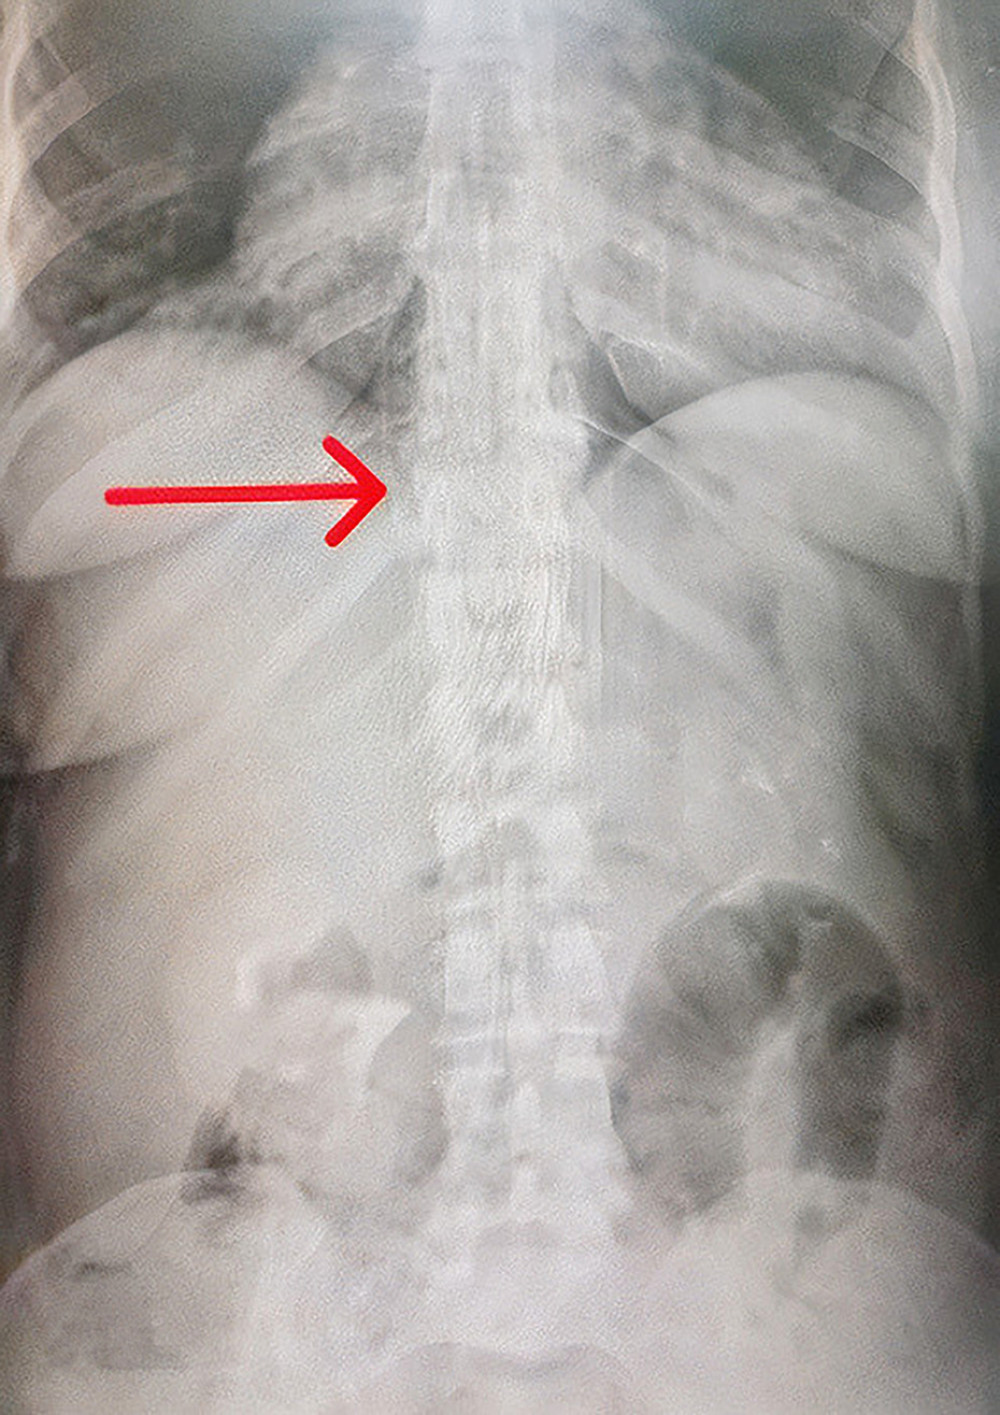 Abdominal X-ray showing the guidewire (red arrow) passing through the inferior vena cava.